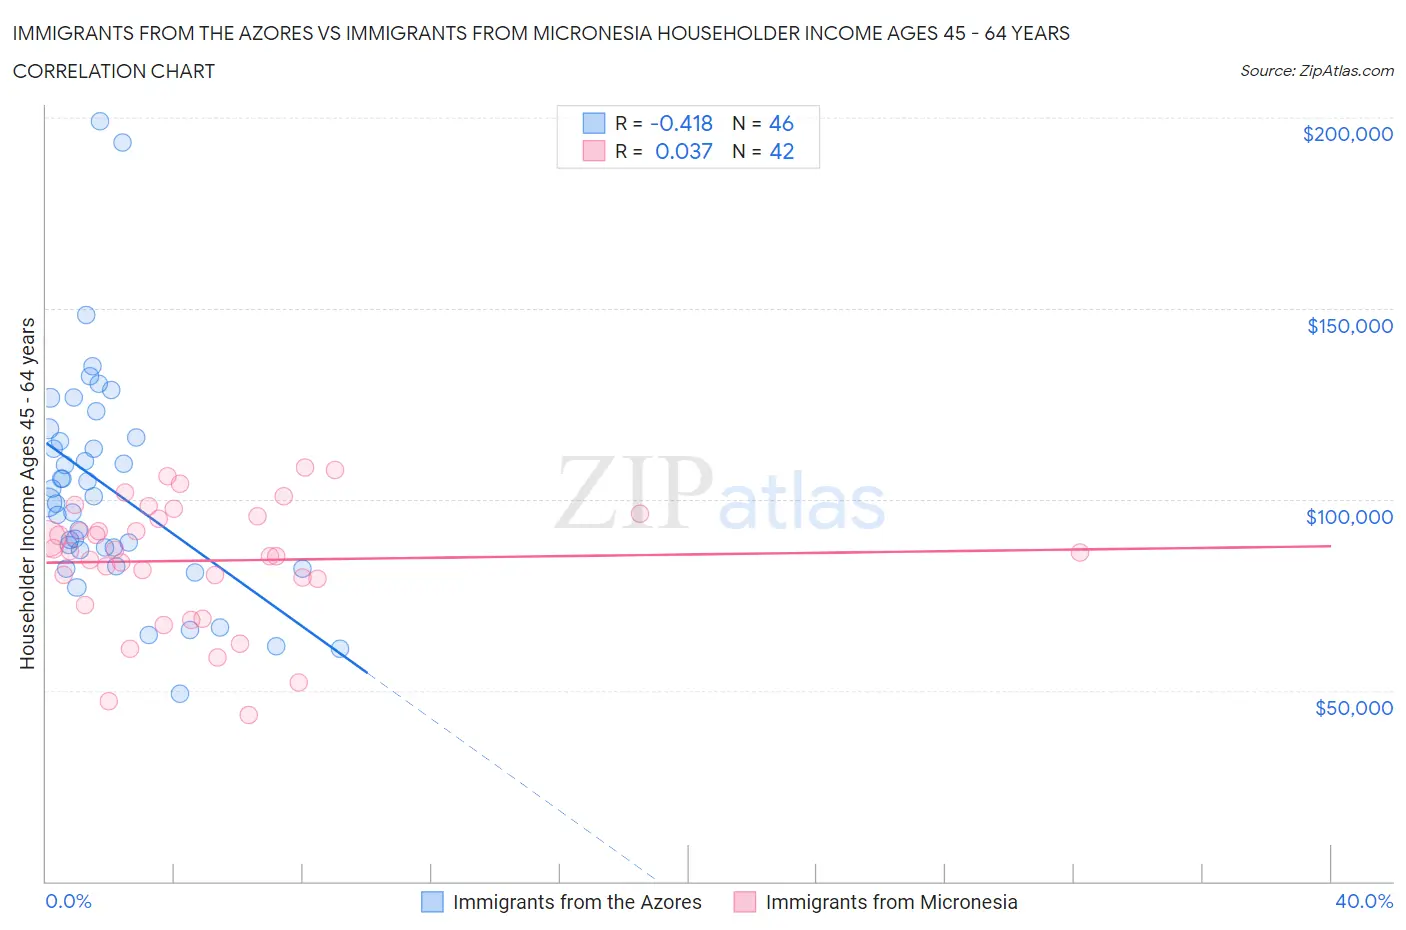 Immigrants from the Azores vs Immigrants from Micronesia Householder Income Ages 45 - 64 years